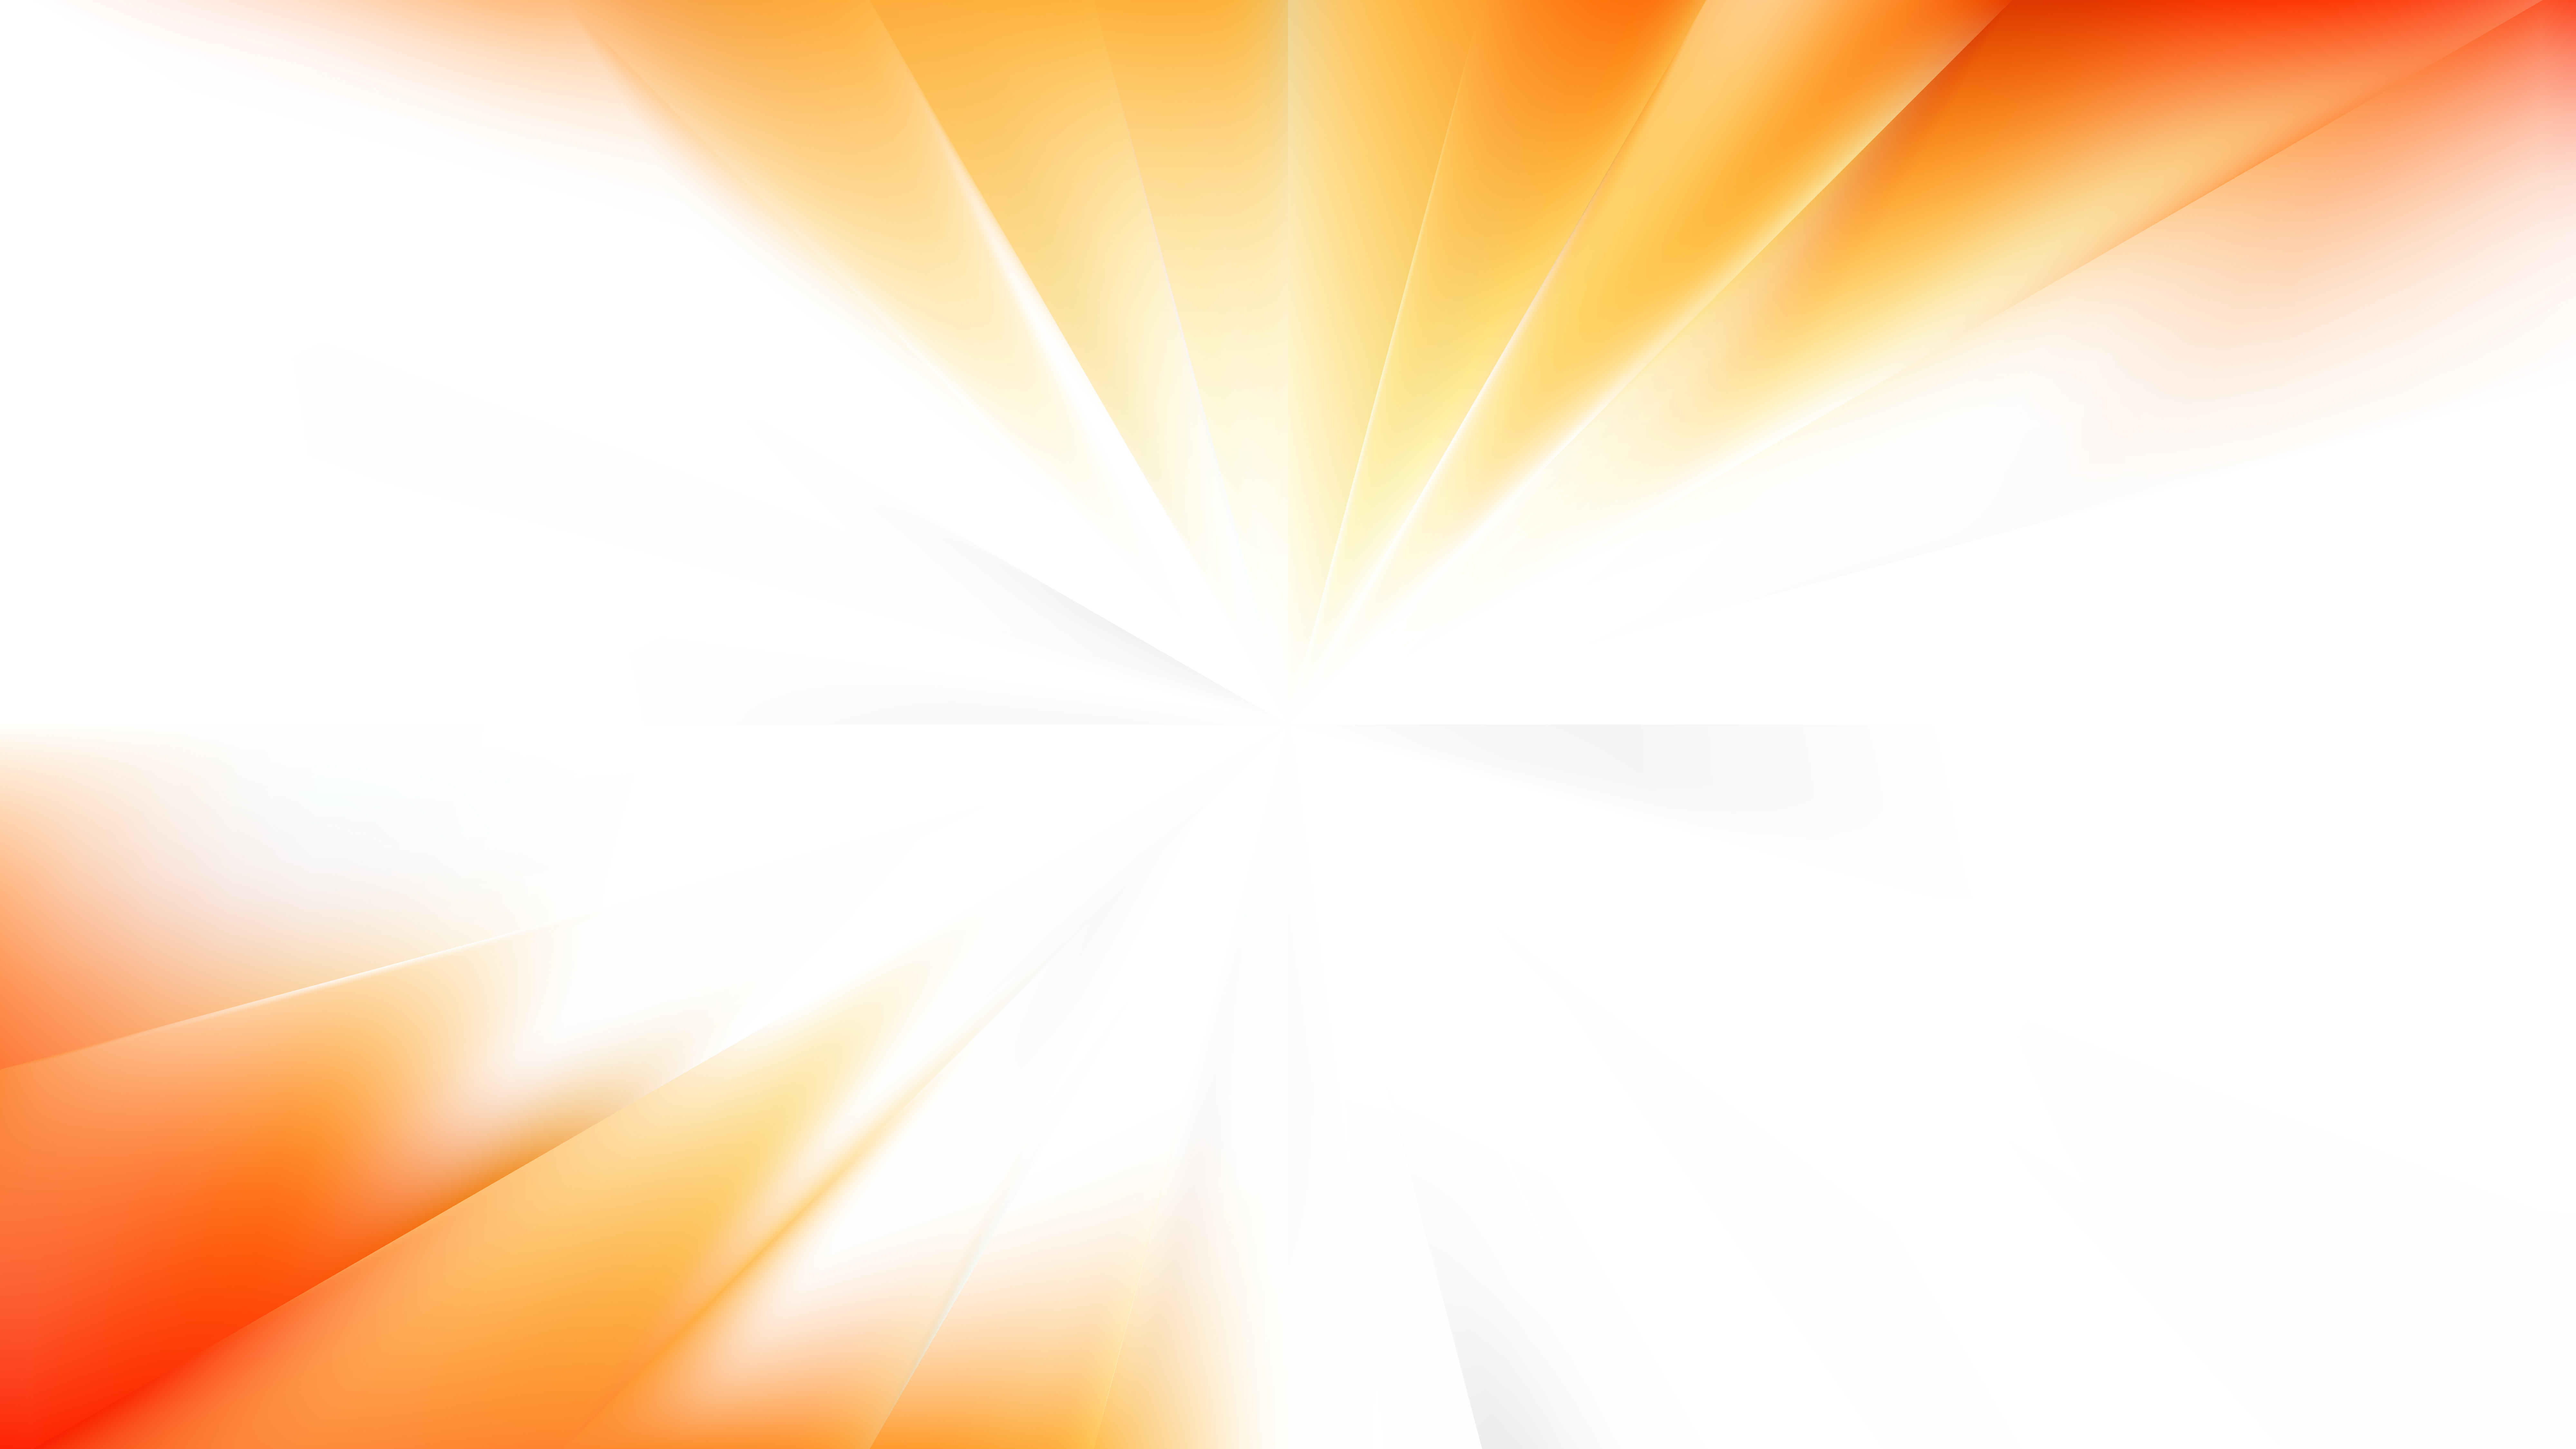 Free Abstract Light Orange Radial Stripes Background Vector